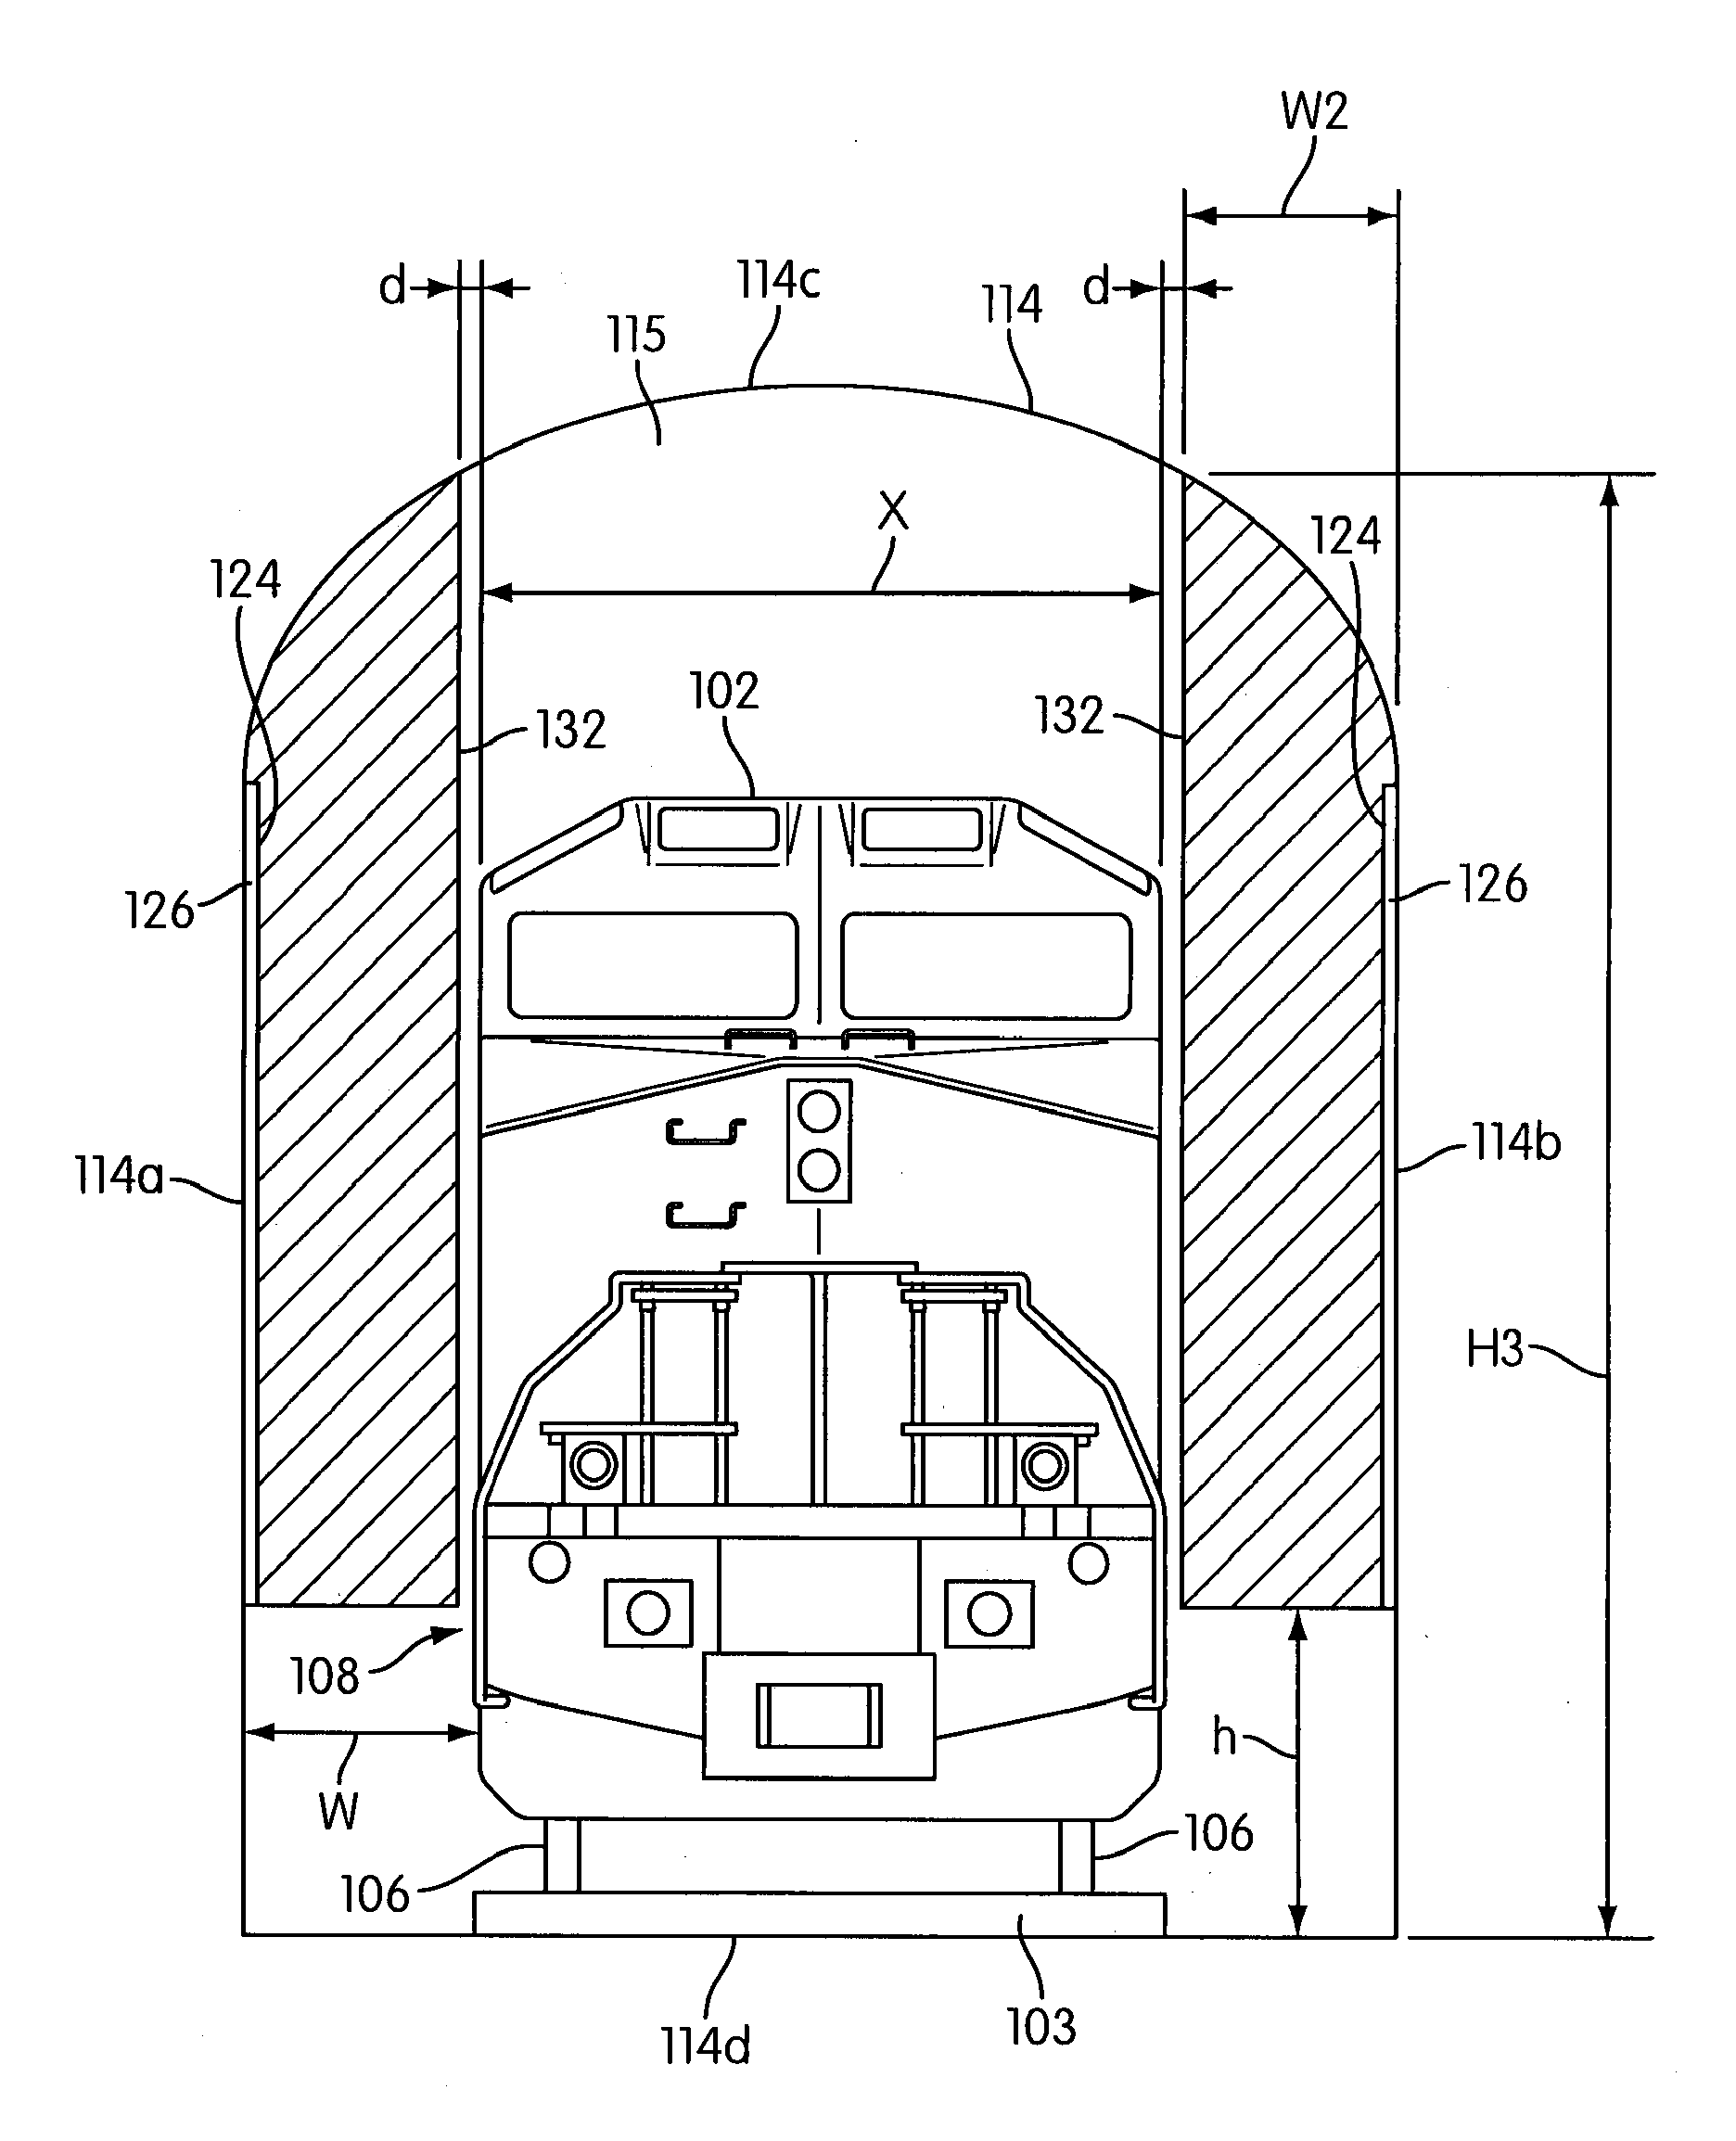 Air baffles in railroad tunnels for decreased airflow therein and improved ventilation and cooling of locomotives